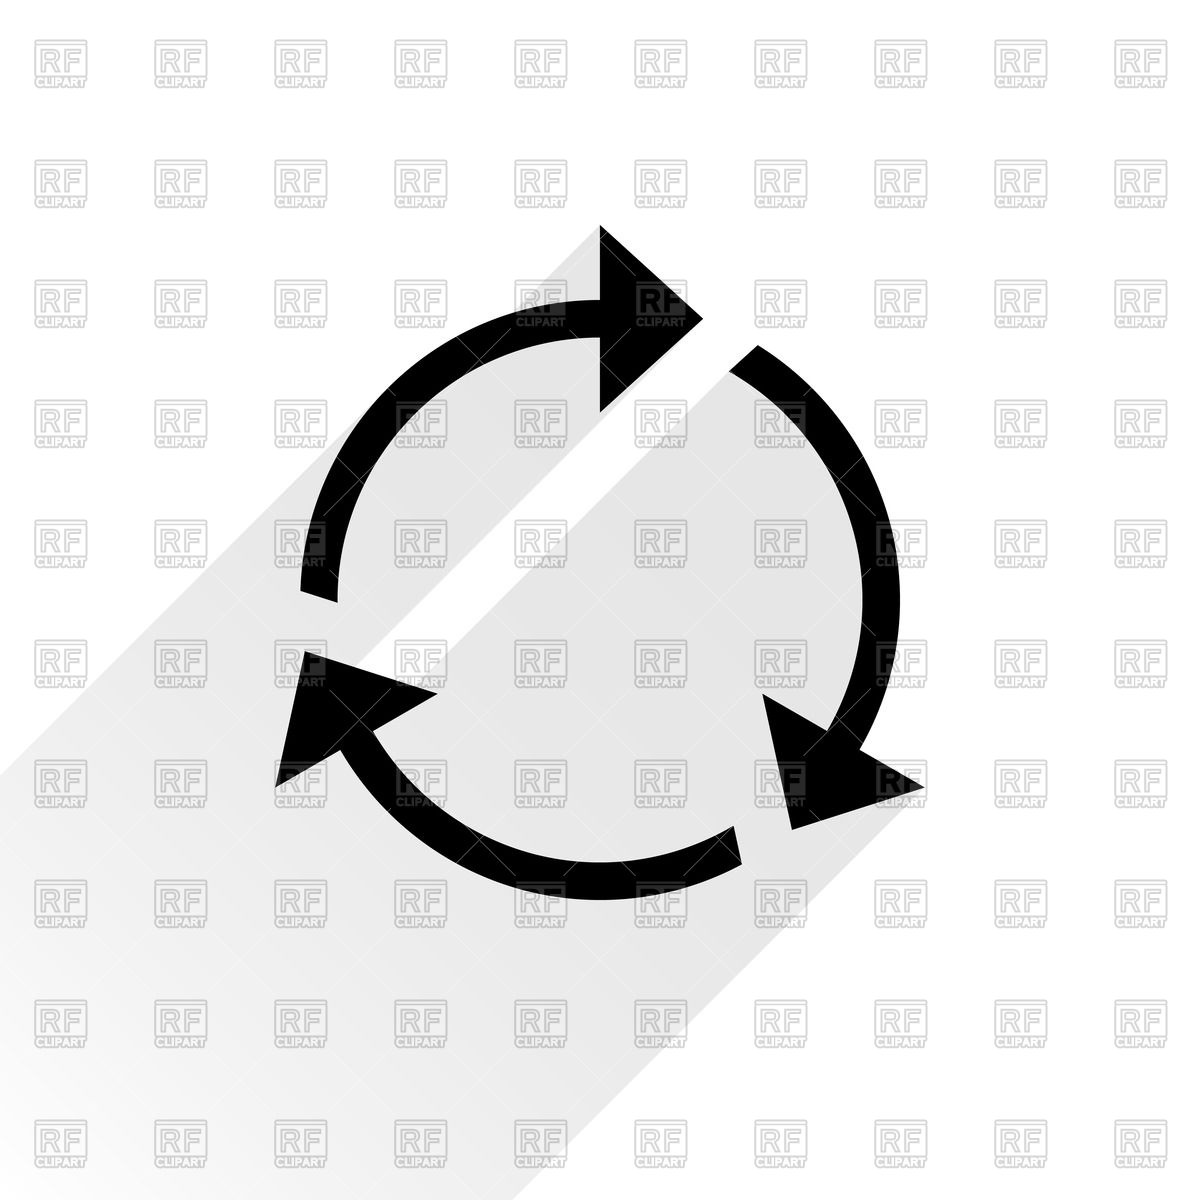 Three Sections Thin Round Arrow   Turn Symbol 48959 Download Royalty